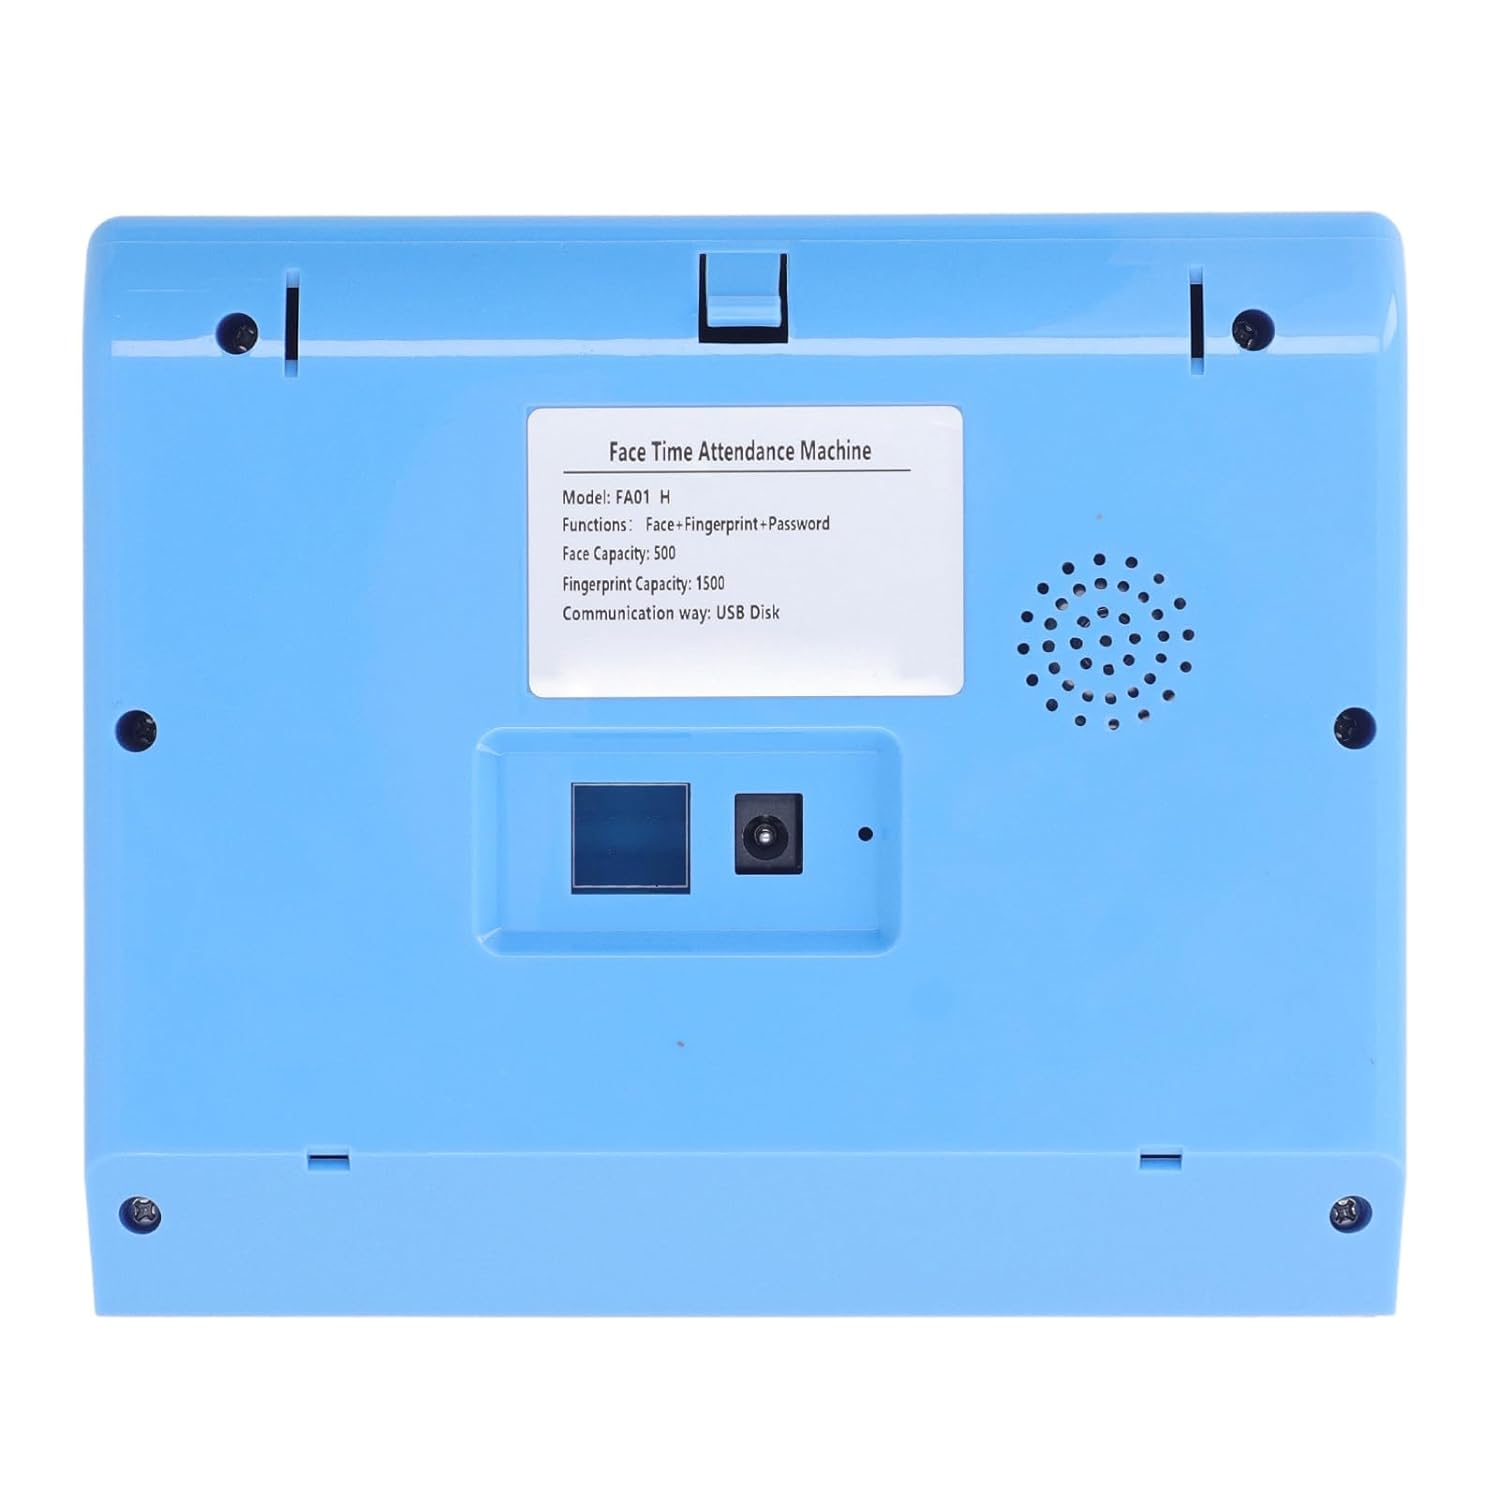 Time Attendance, IP54 Waterproof Biometric USB Interface Time Clock Machine 100-240V for Office (US Plug)